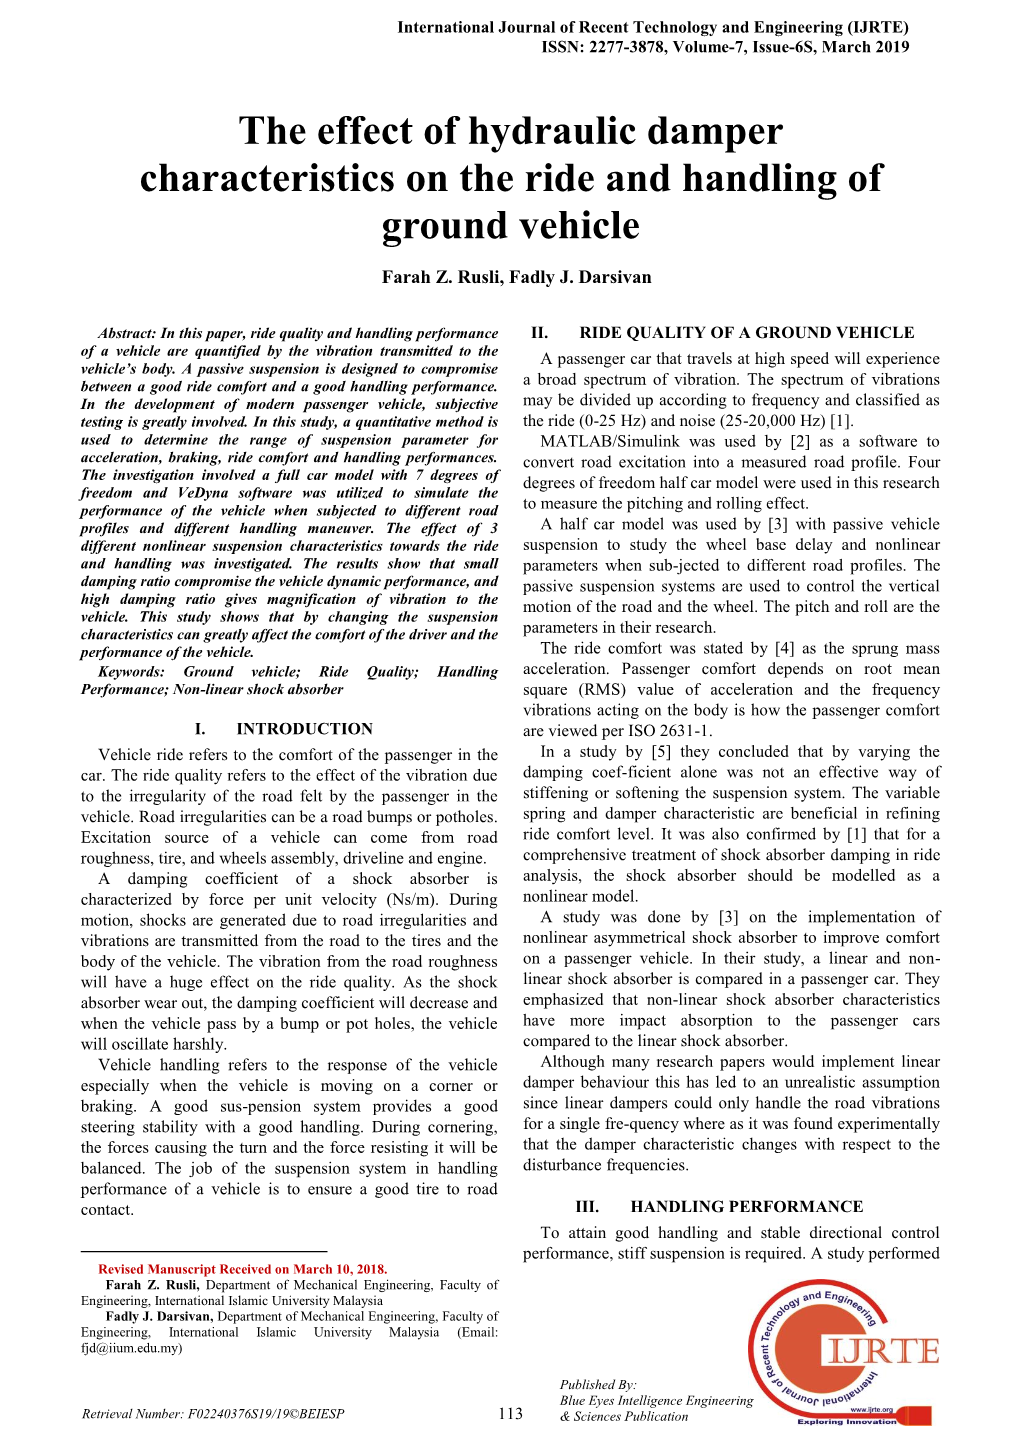 The Effect of Hydraulic Damper Characteristics on the Ride and Handling of Ground Vehicle